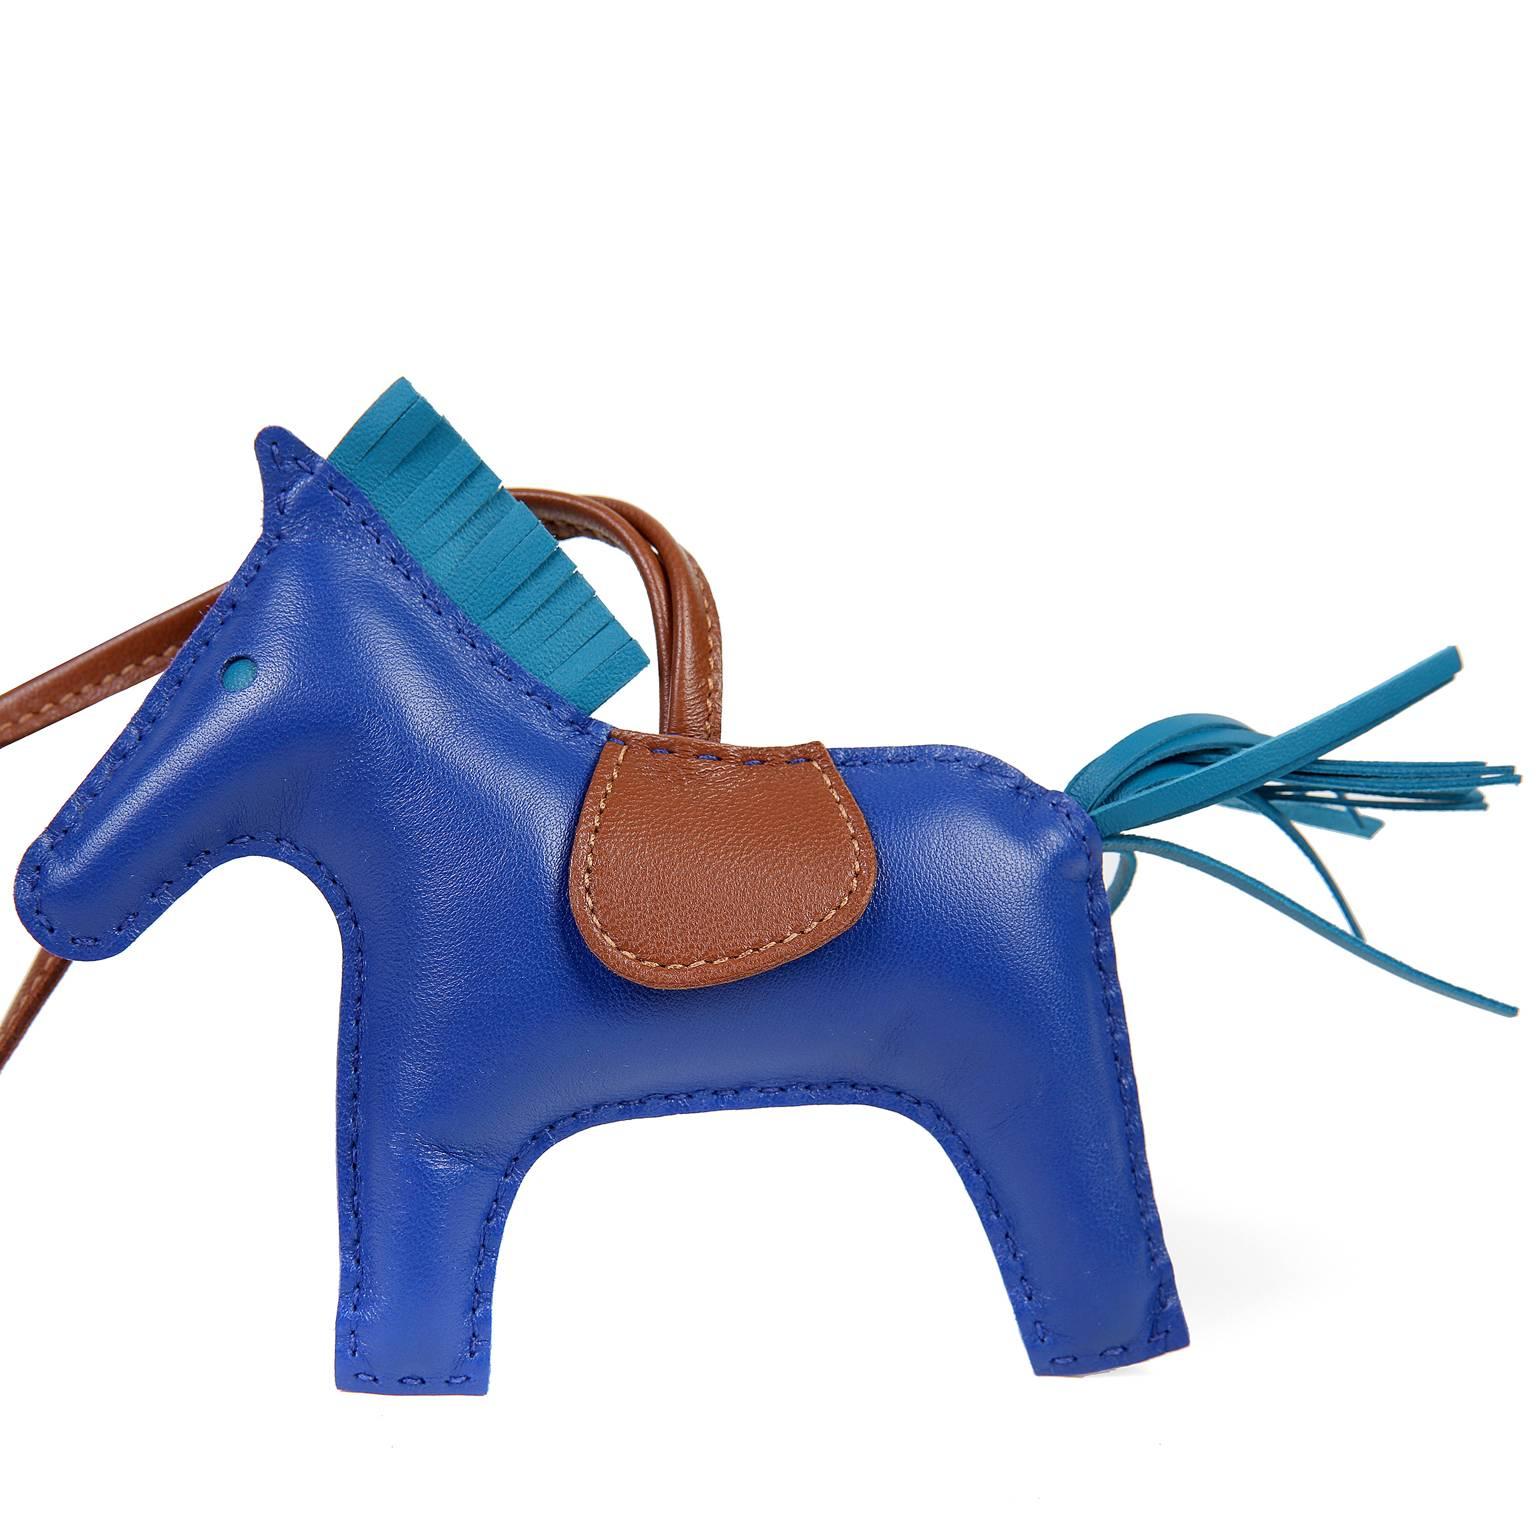 Hermès Bleu Electrique Lambskin Milo Rodeo MM Horse Charm is new. The perfect addition to any bag, this whimsical charm is very collectible as well. 

Blue Electrique lambskin stuffed horse has fringed Blue Jean mane and tail.  Classic gold